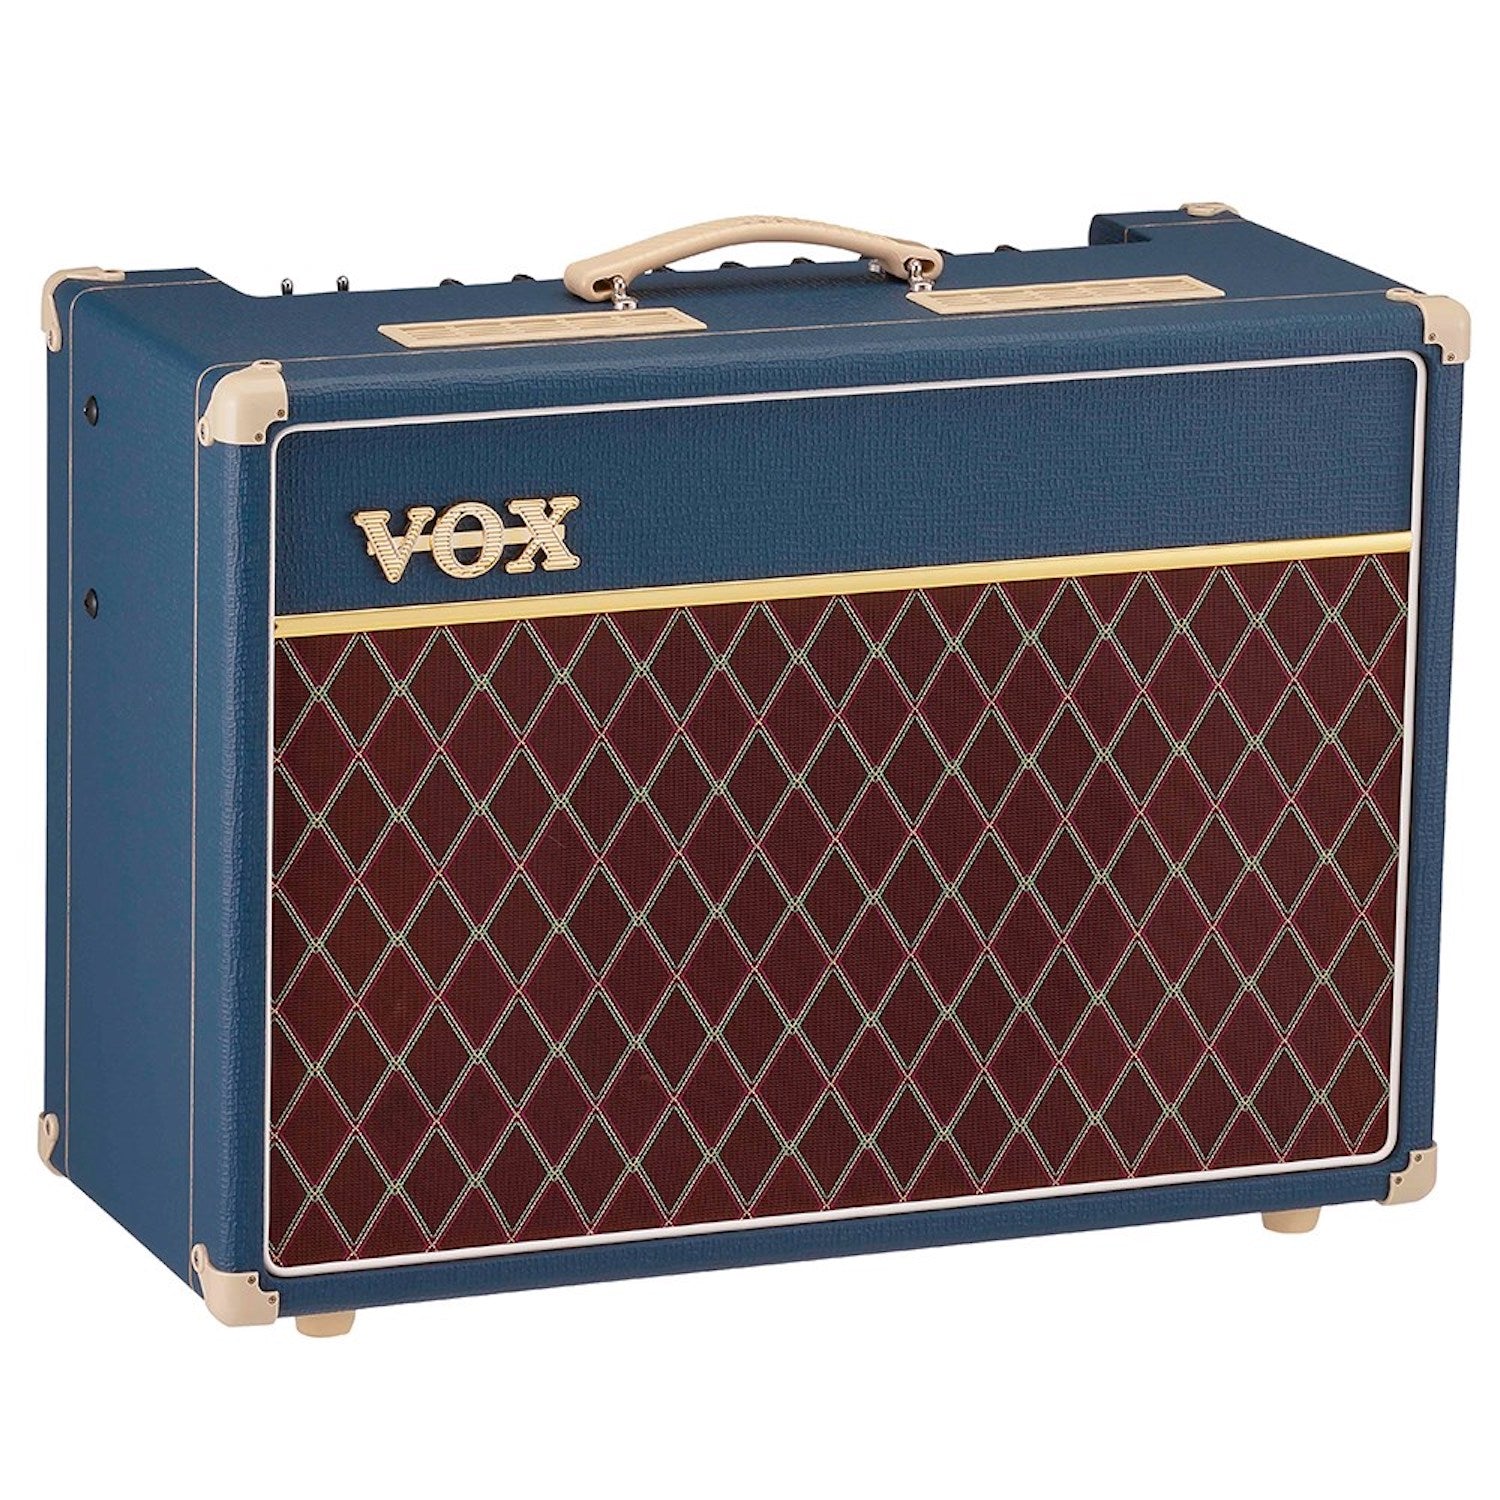 Vox AC15C1-RB Limited Edition 1x12" Guitar Amp Combo-Rich Blue